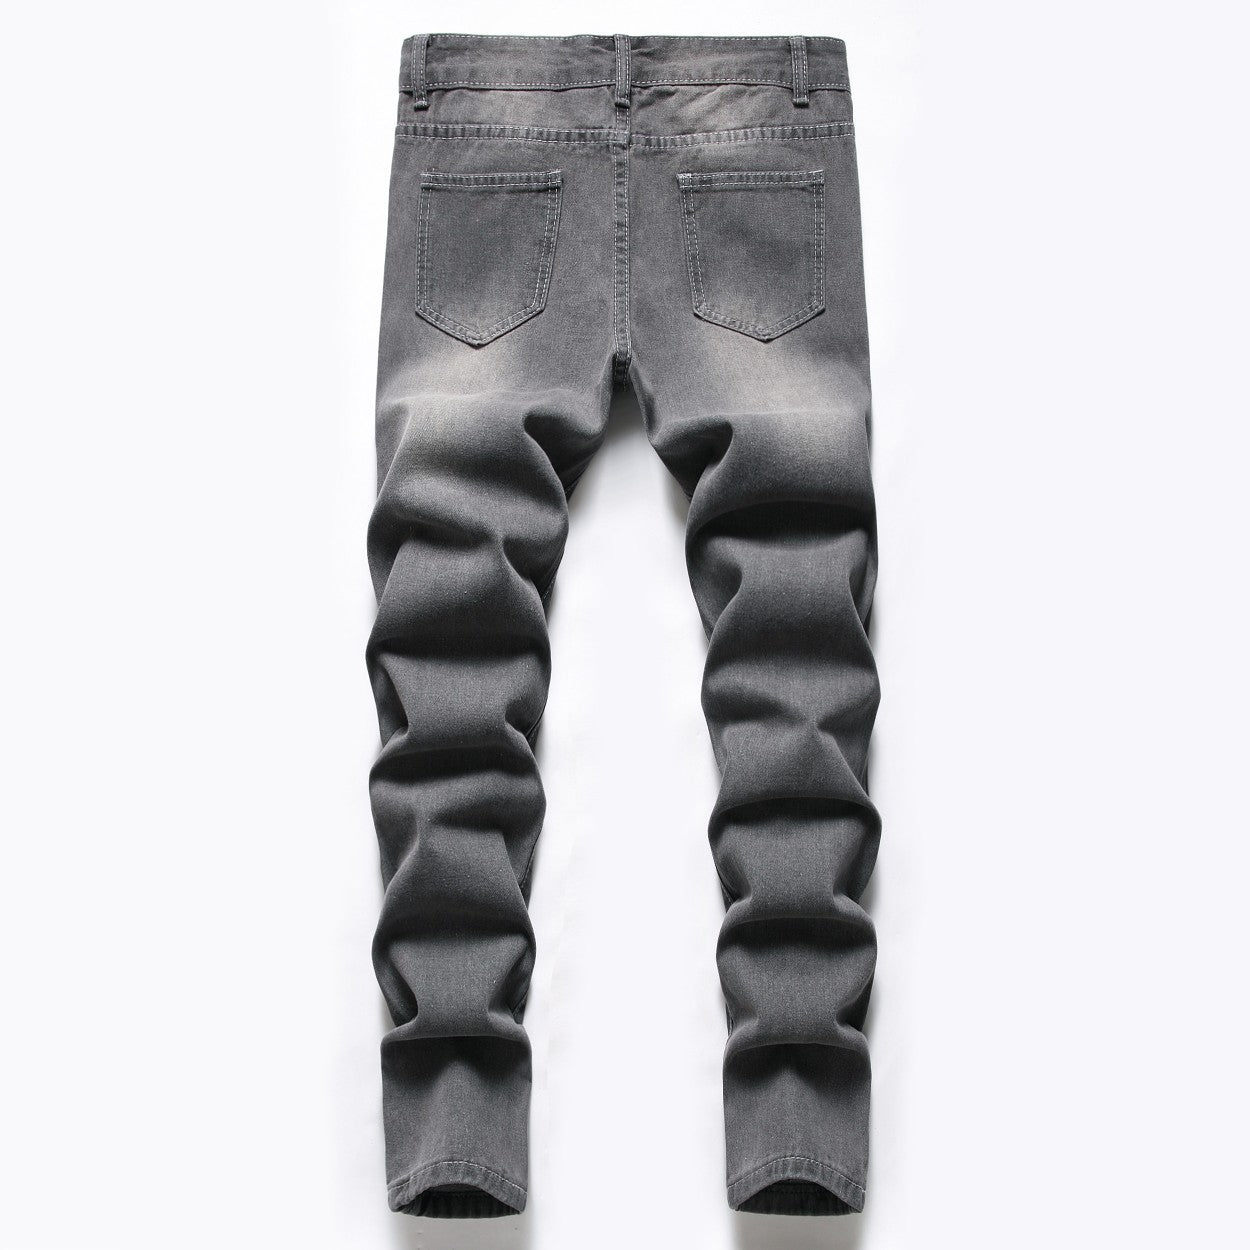 Men's gray patch ripped jeans